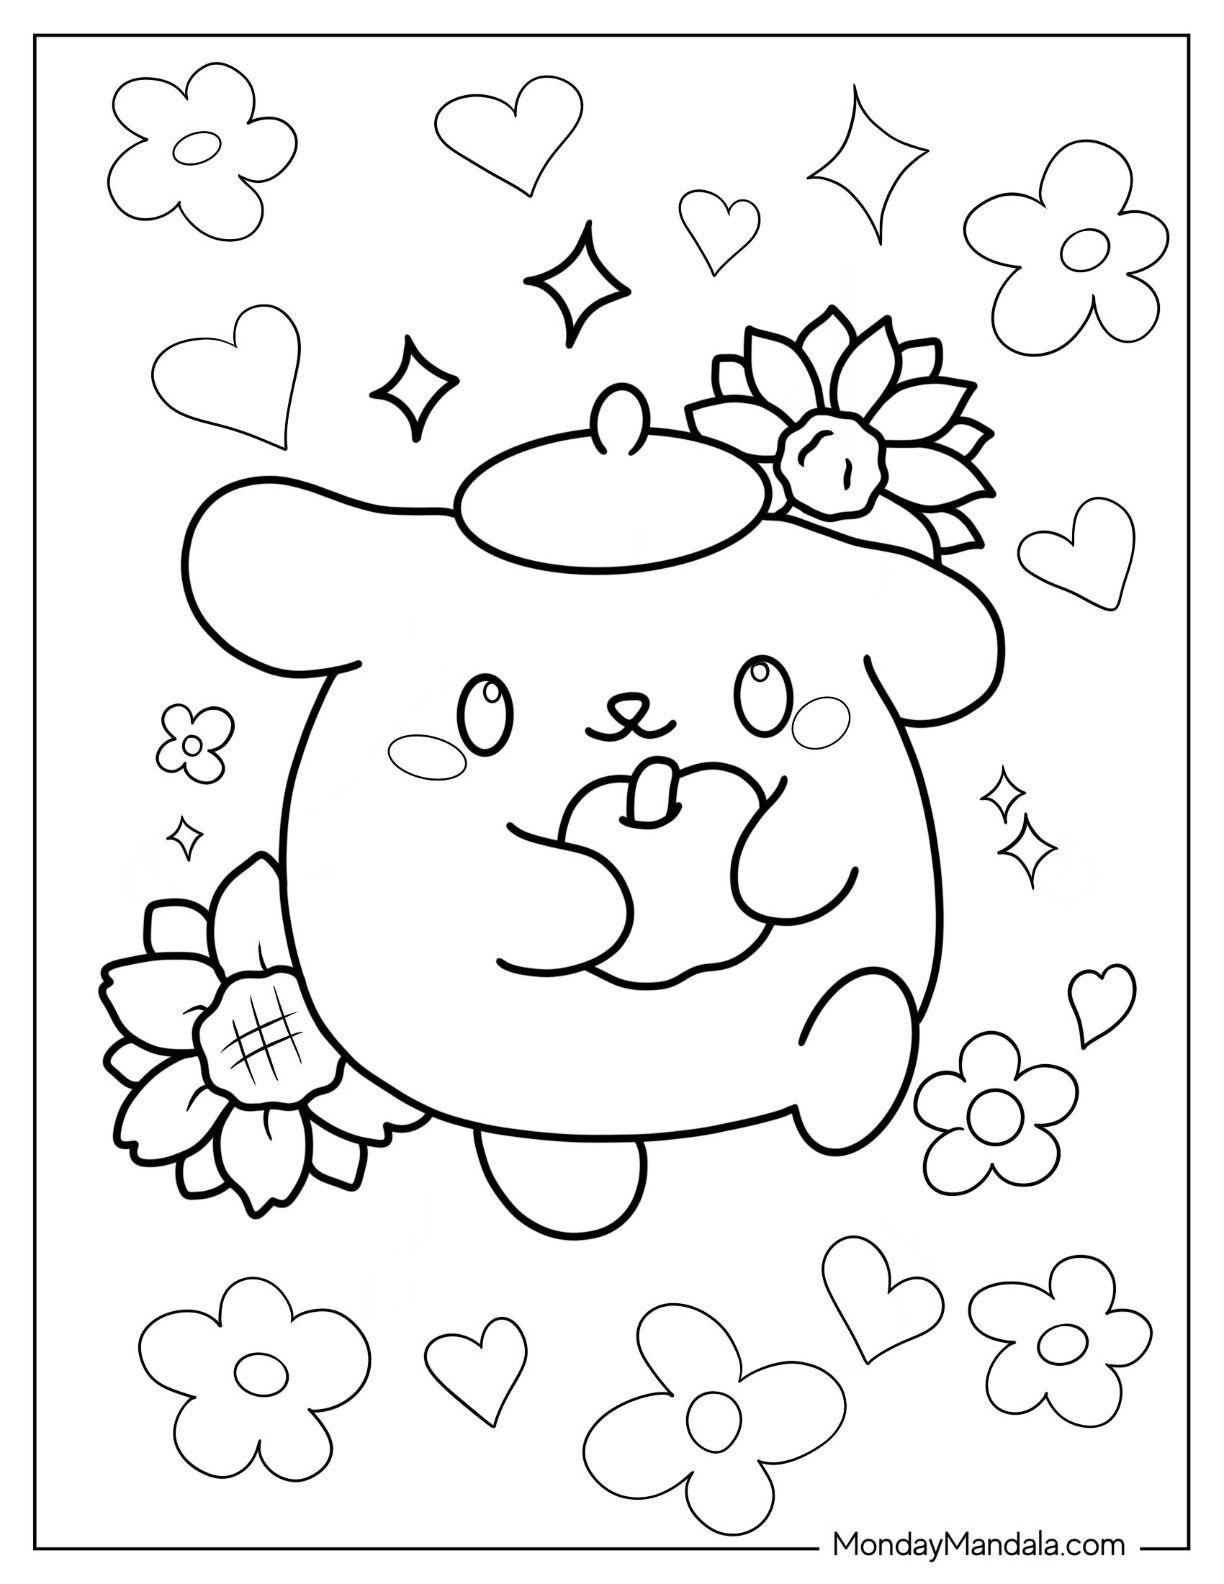 50 Cute Coloring Pages (Free PDF ...